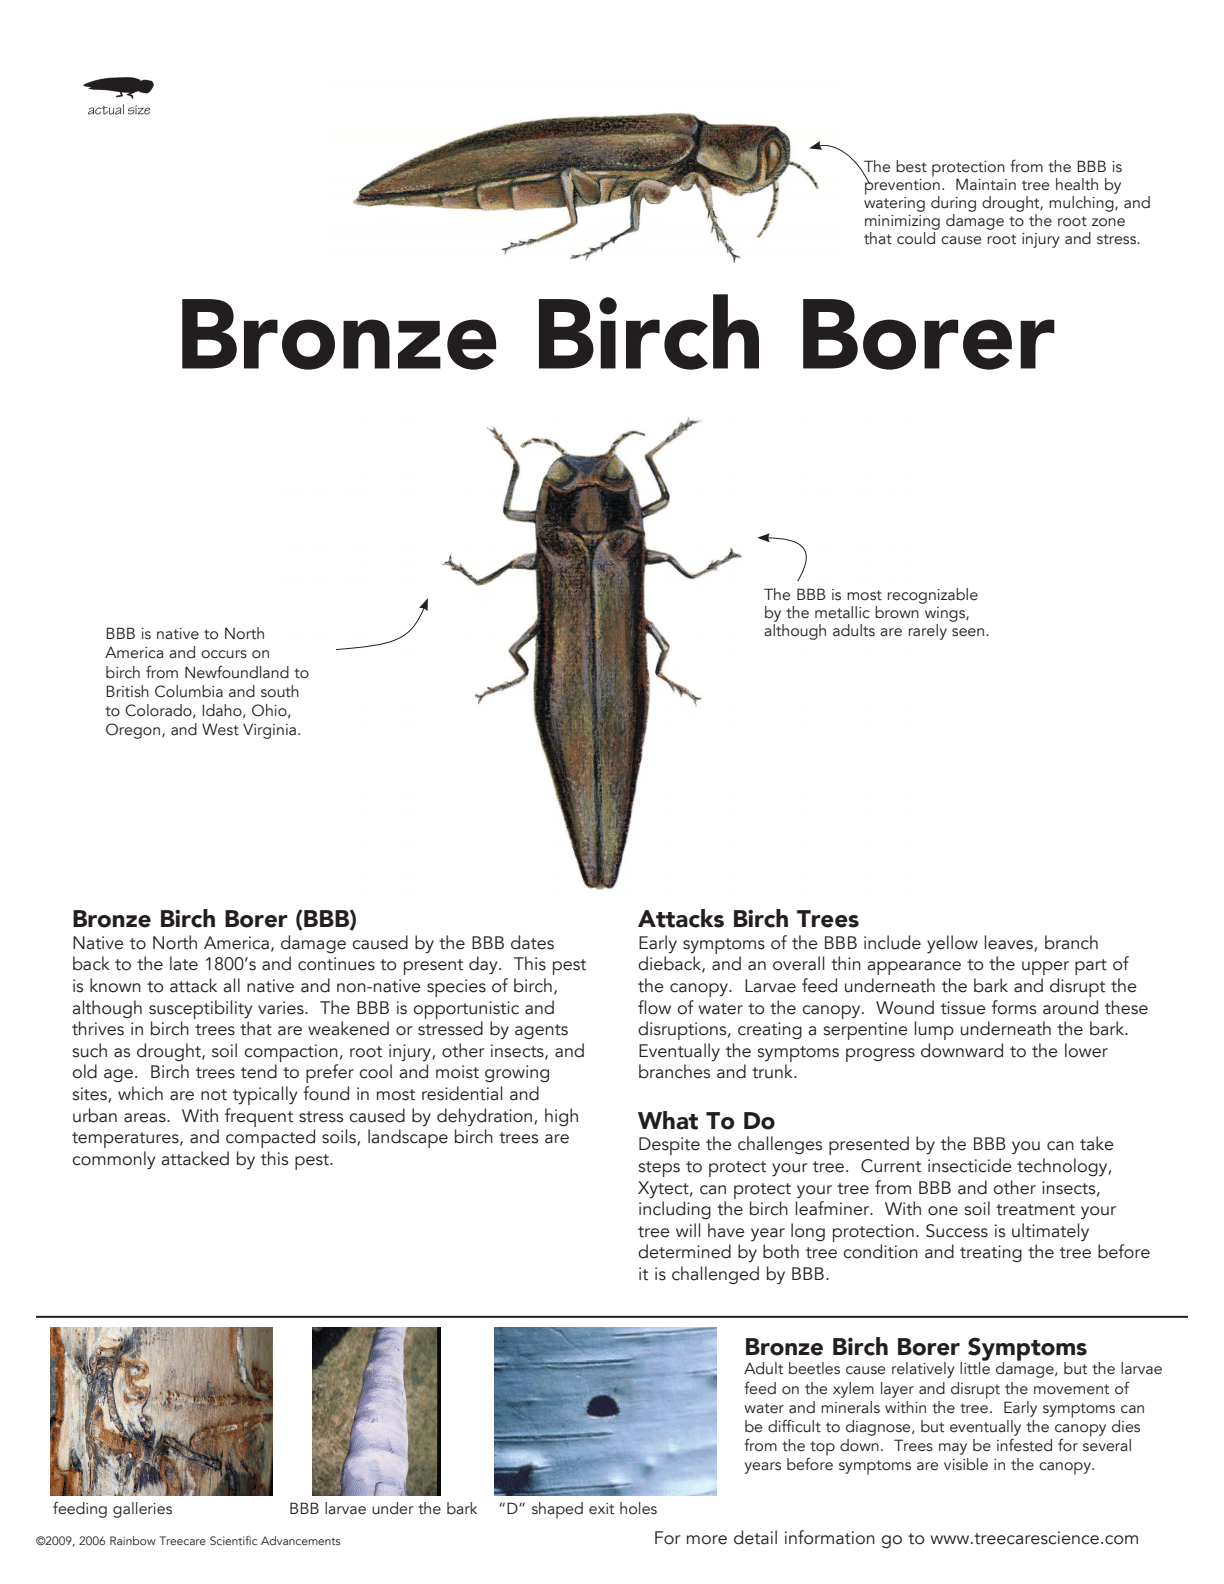 This image provides information about the Bronze Birch Borer insect, showing illustrations, descriptions of damage, symptoms, and preventive measures for trees.